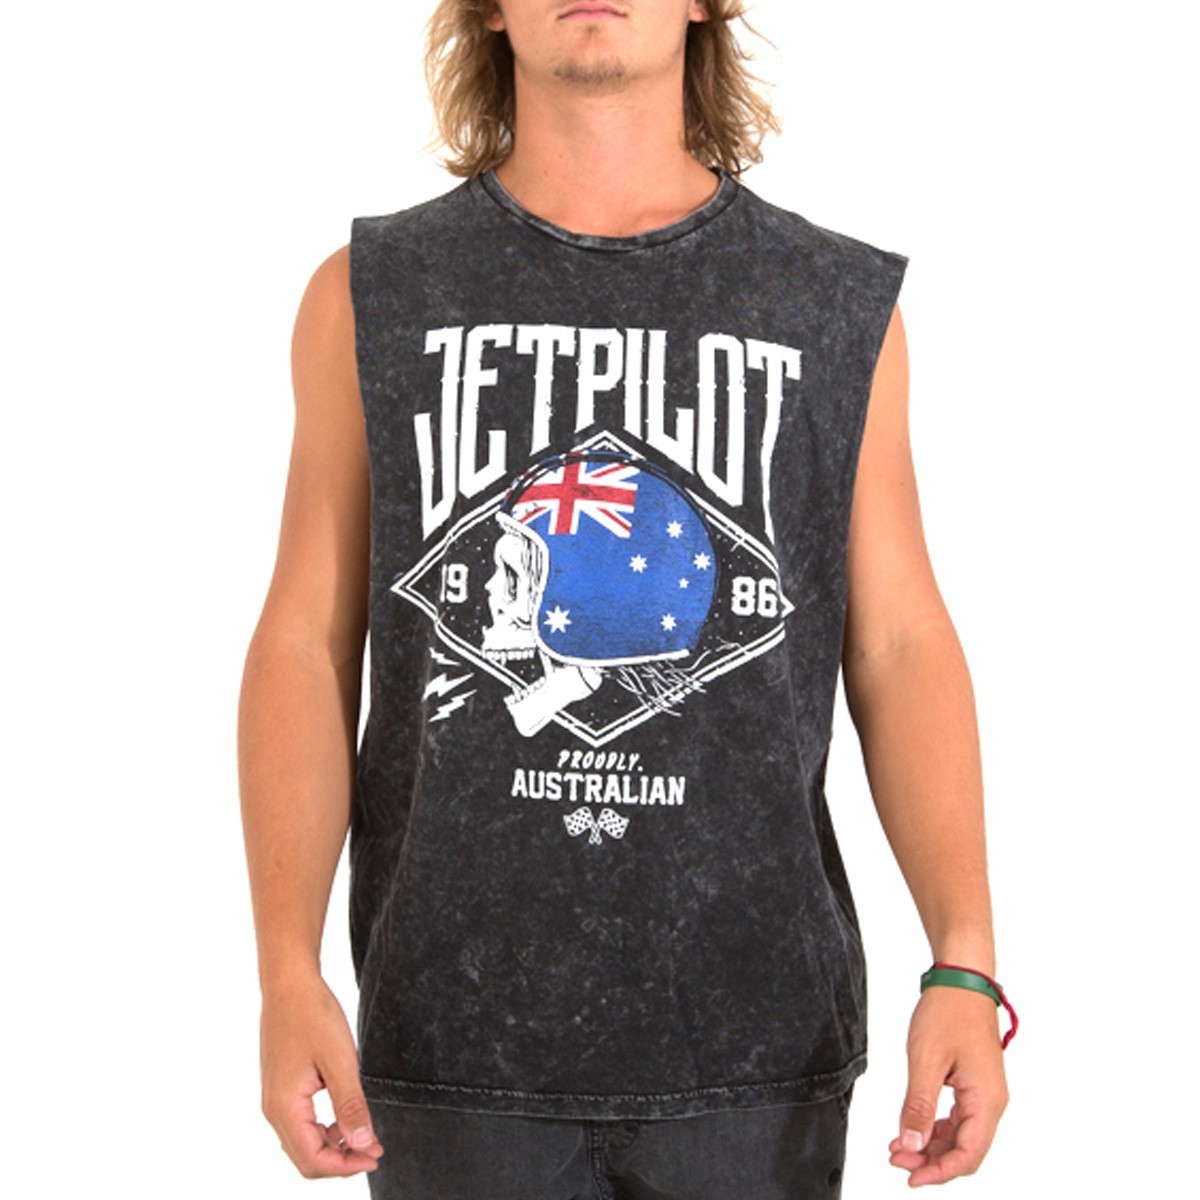 Blowsion. JETPILOT BUILT FOR SPEED MENS MUSCLE TEE ACID - S16691